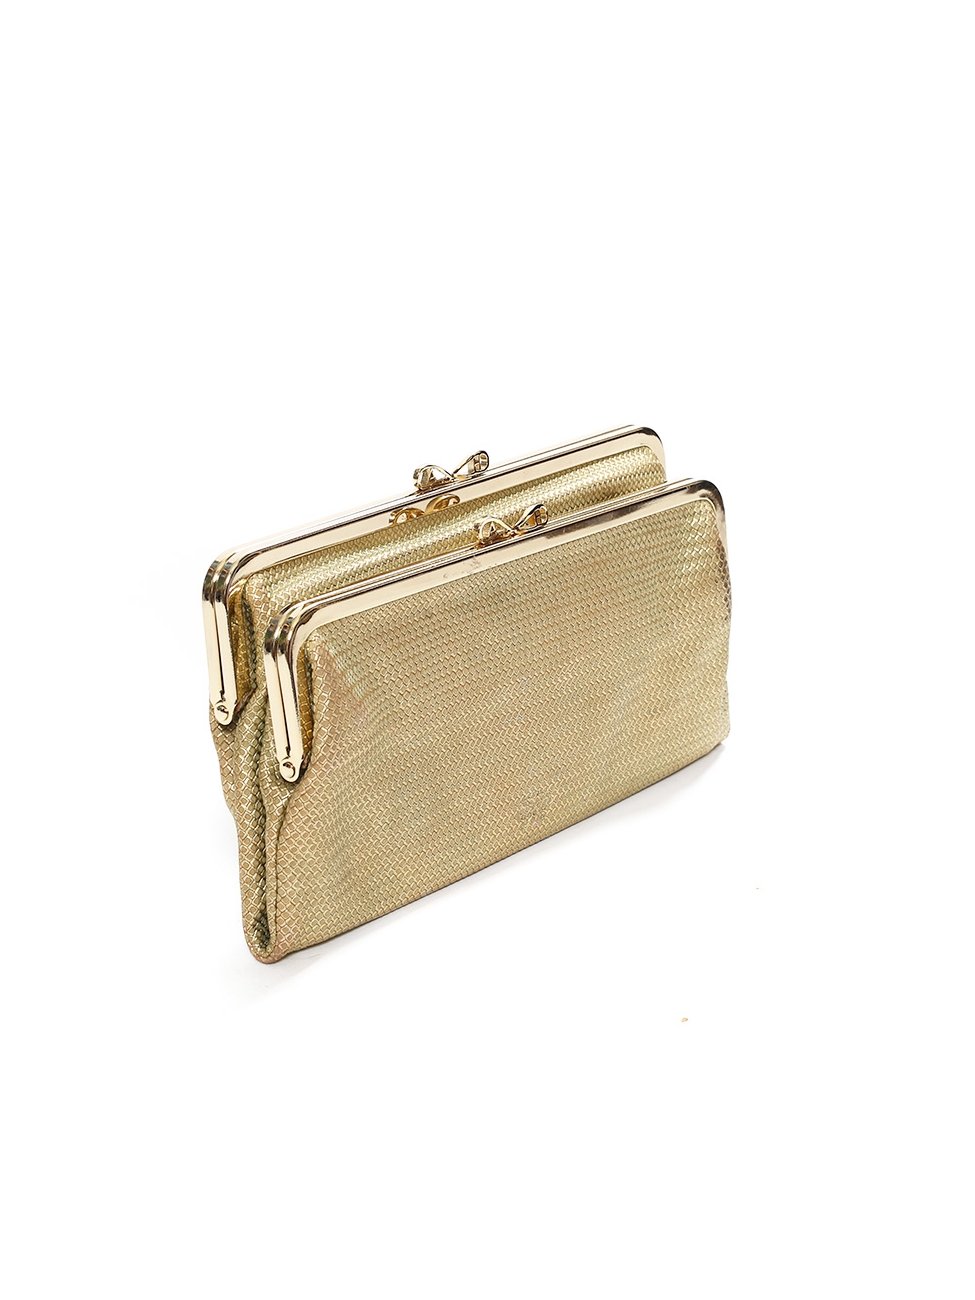 anya-hindmarch-luce-metallic-gold-textured-leather-wallet-clutch-.jpg